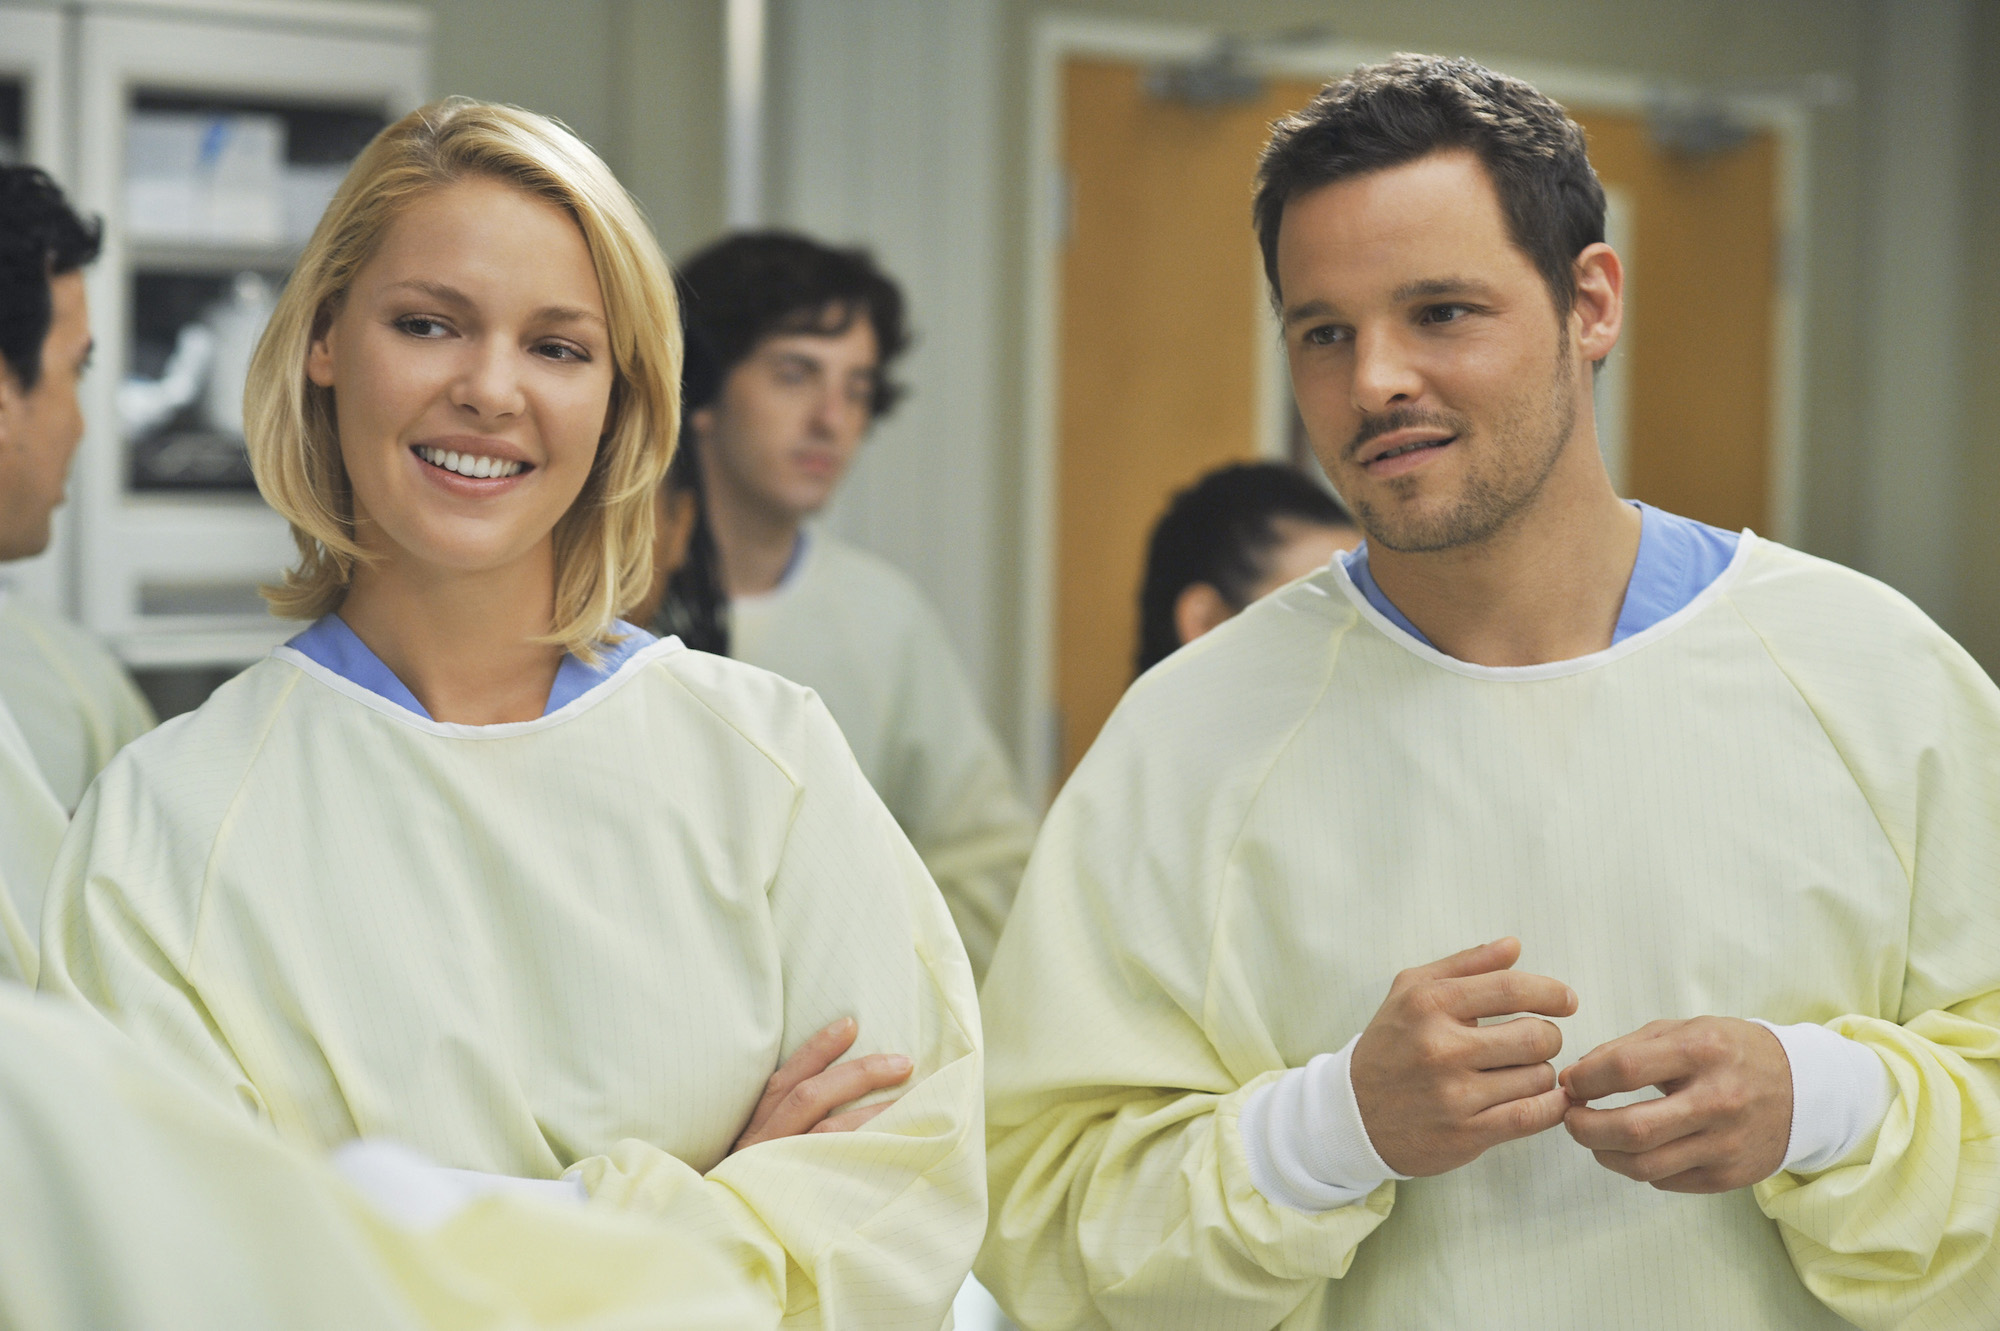 Katherine Heigl, and Justin Chambers dressed in white scrubs from 'Grey's Anatomy'